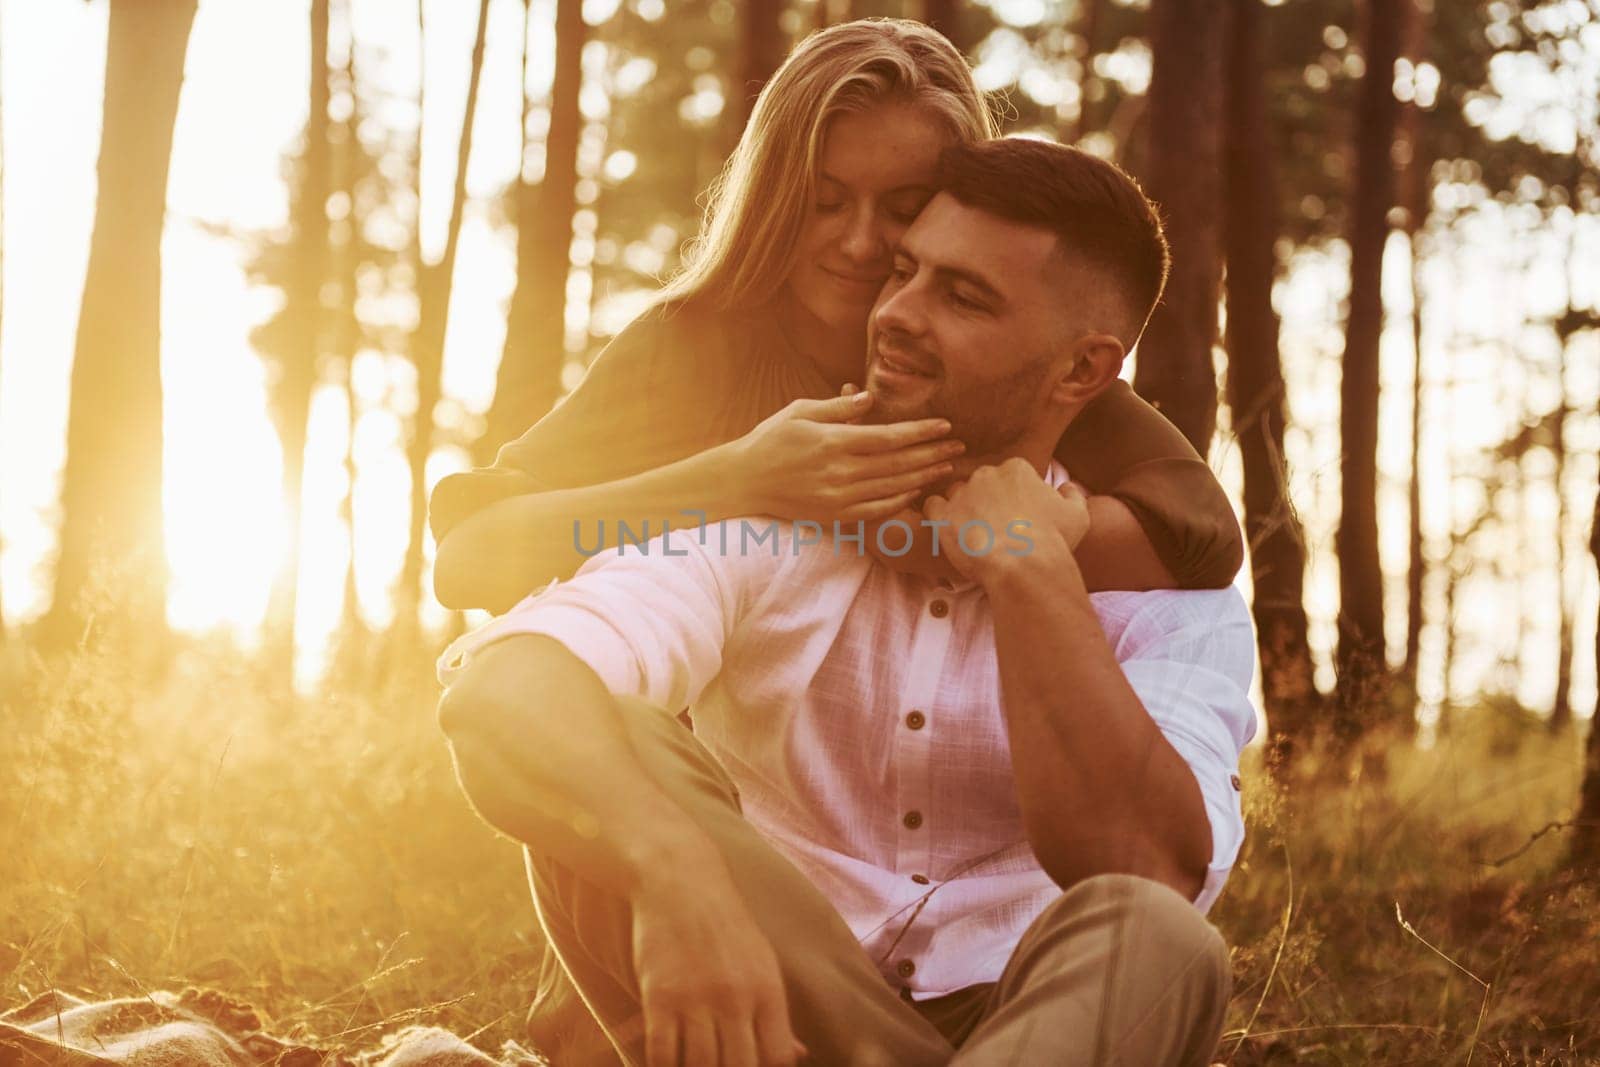 Sitting on the ground. Happy couple is outdoors in the forest at daytime by Standret